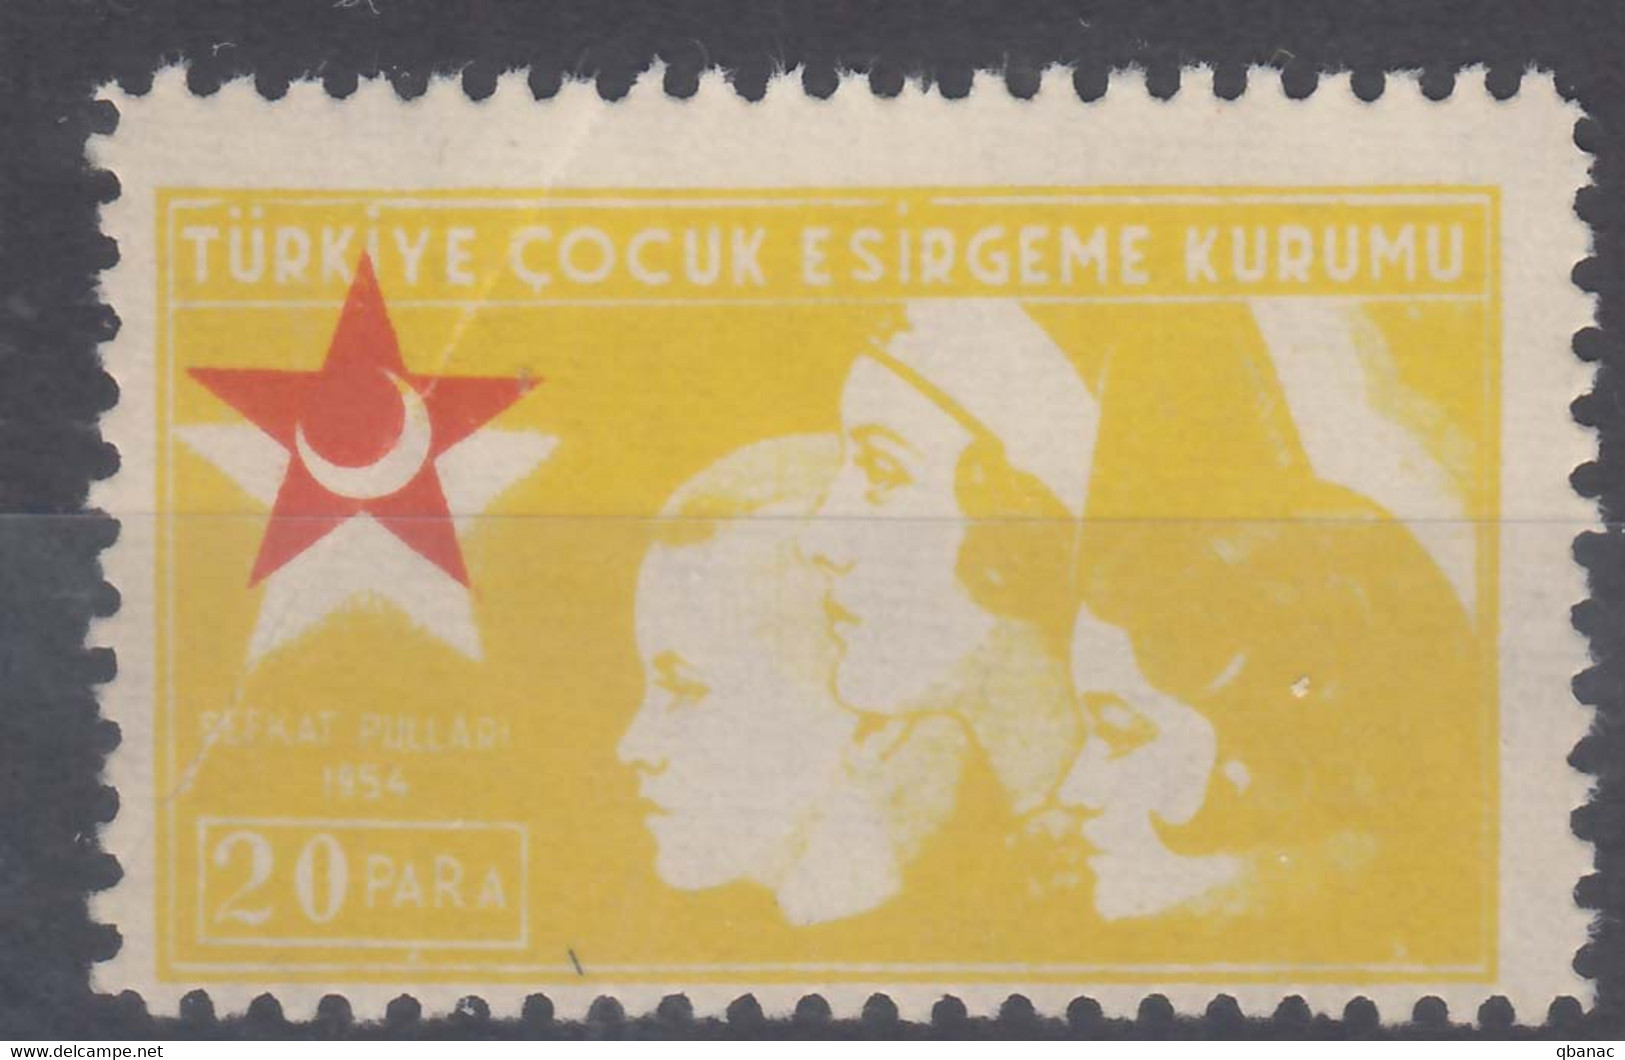 Turkey Back Of Book Charity Stamps 1954, Mint Hinged, Error - Moved Star - Sellos De Beneficiencia